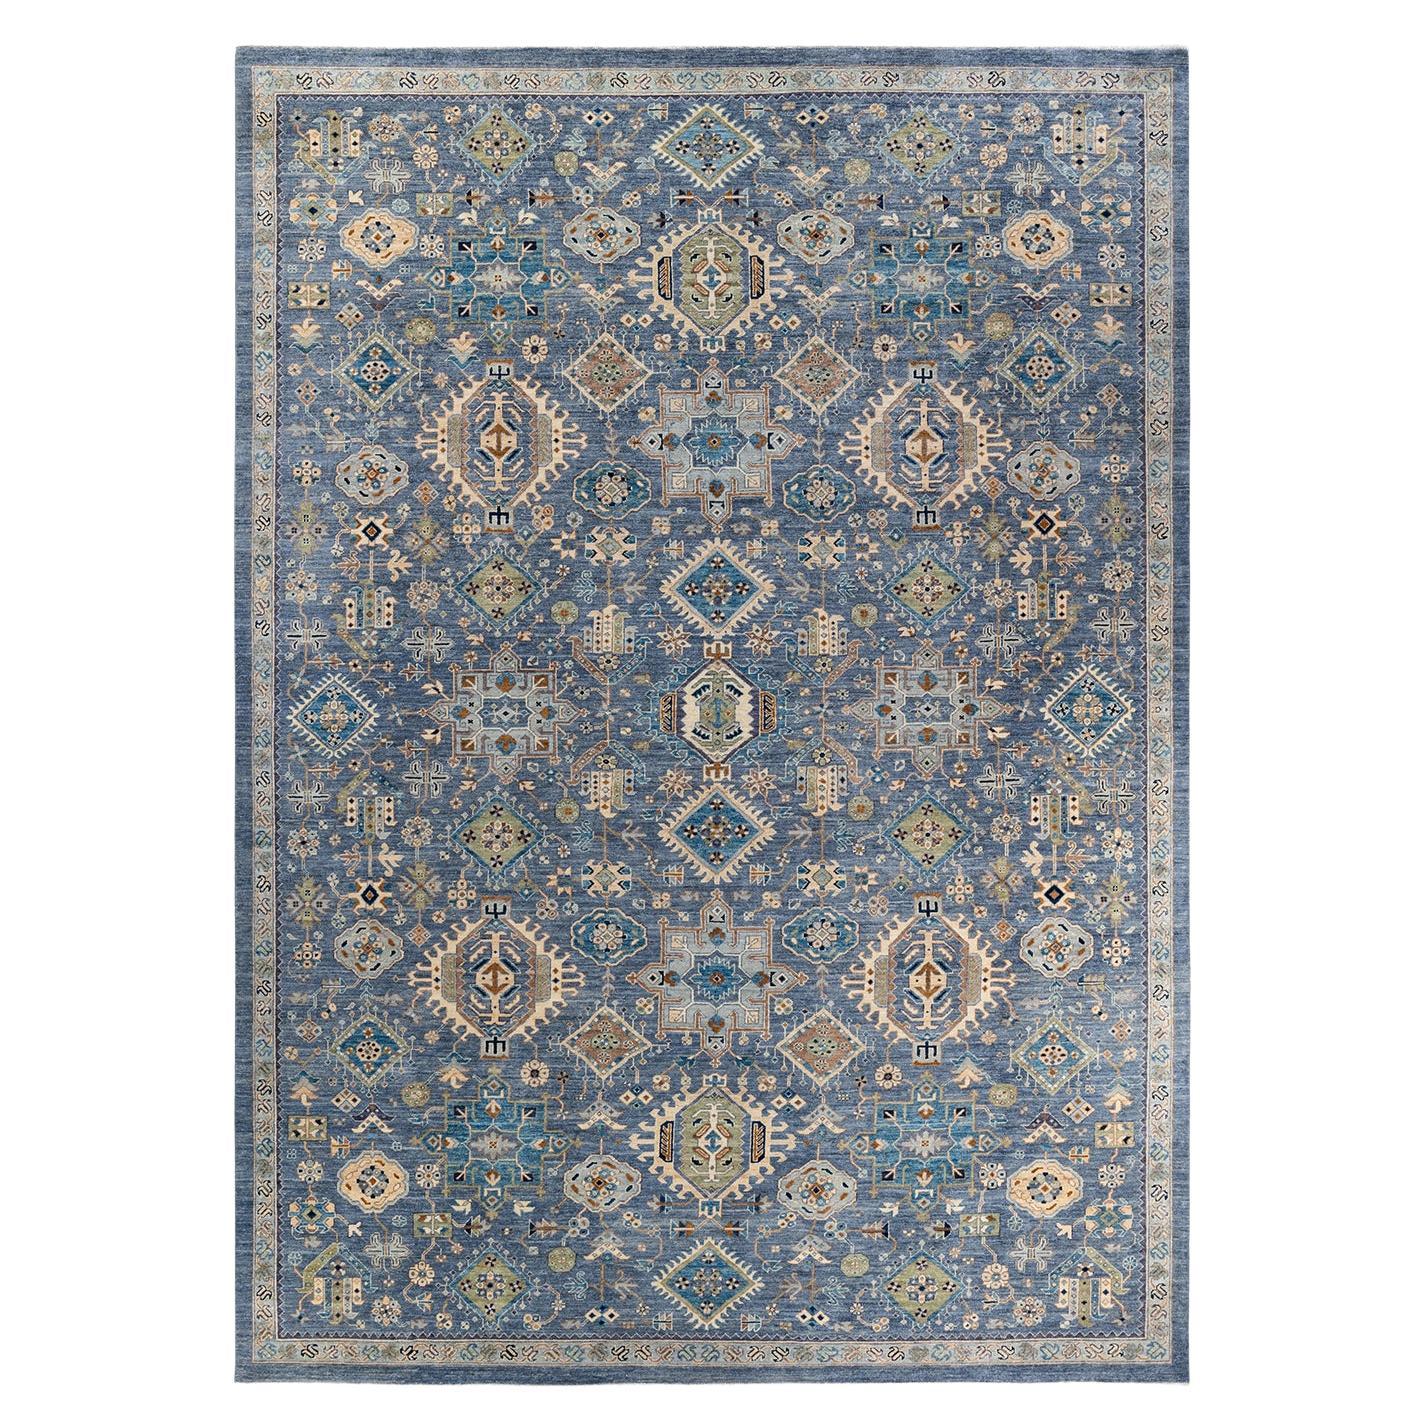 Serapi, One-of-a-Kind Hand-Knotted Runner Rug, Gray